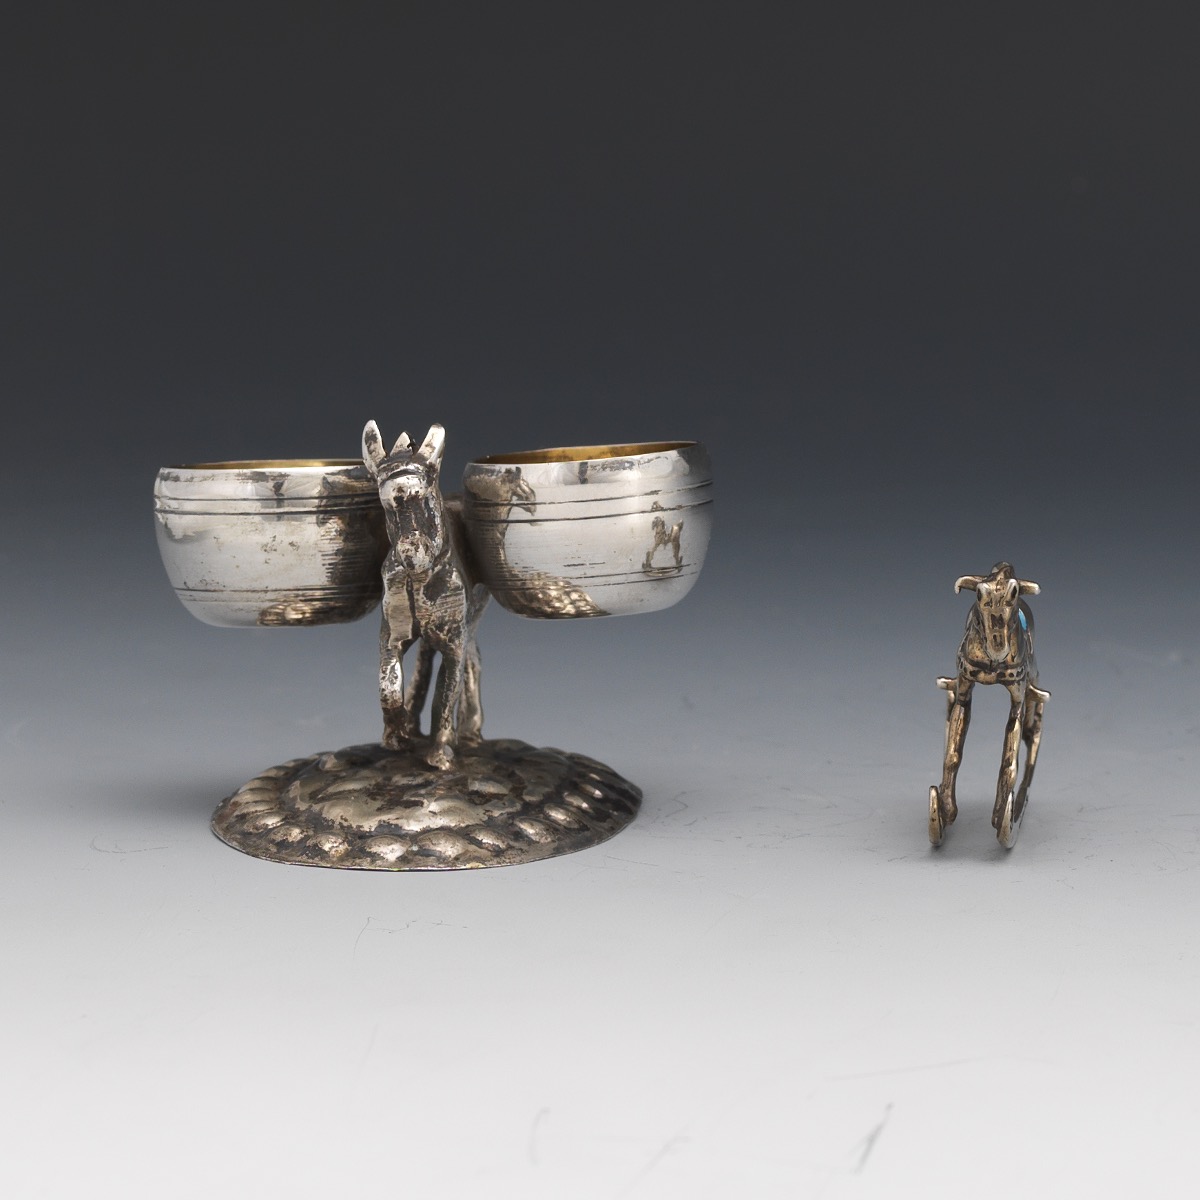 Italian Silver, Gold Wash and Enamel Donkey Salt/Pepper Cellar and Baby Rocking Horse - Image 3 of 7